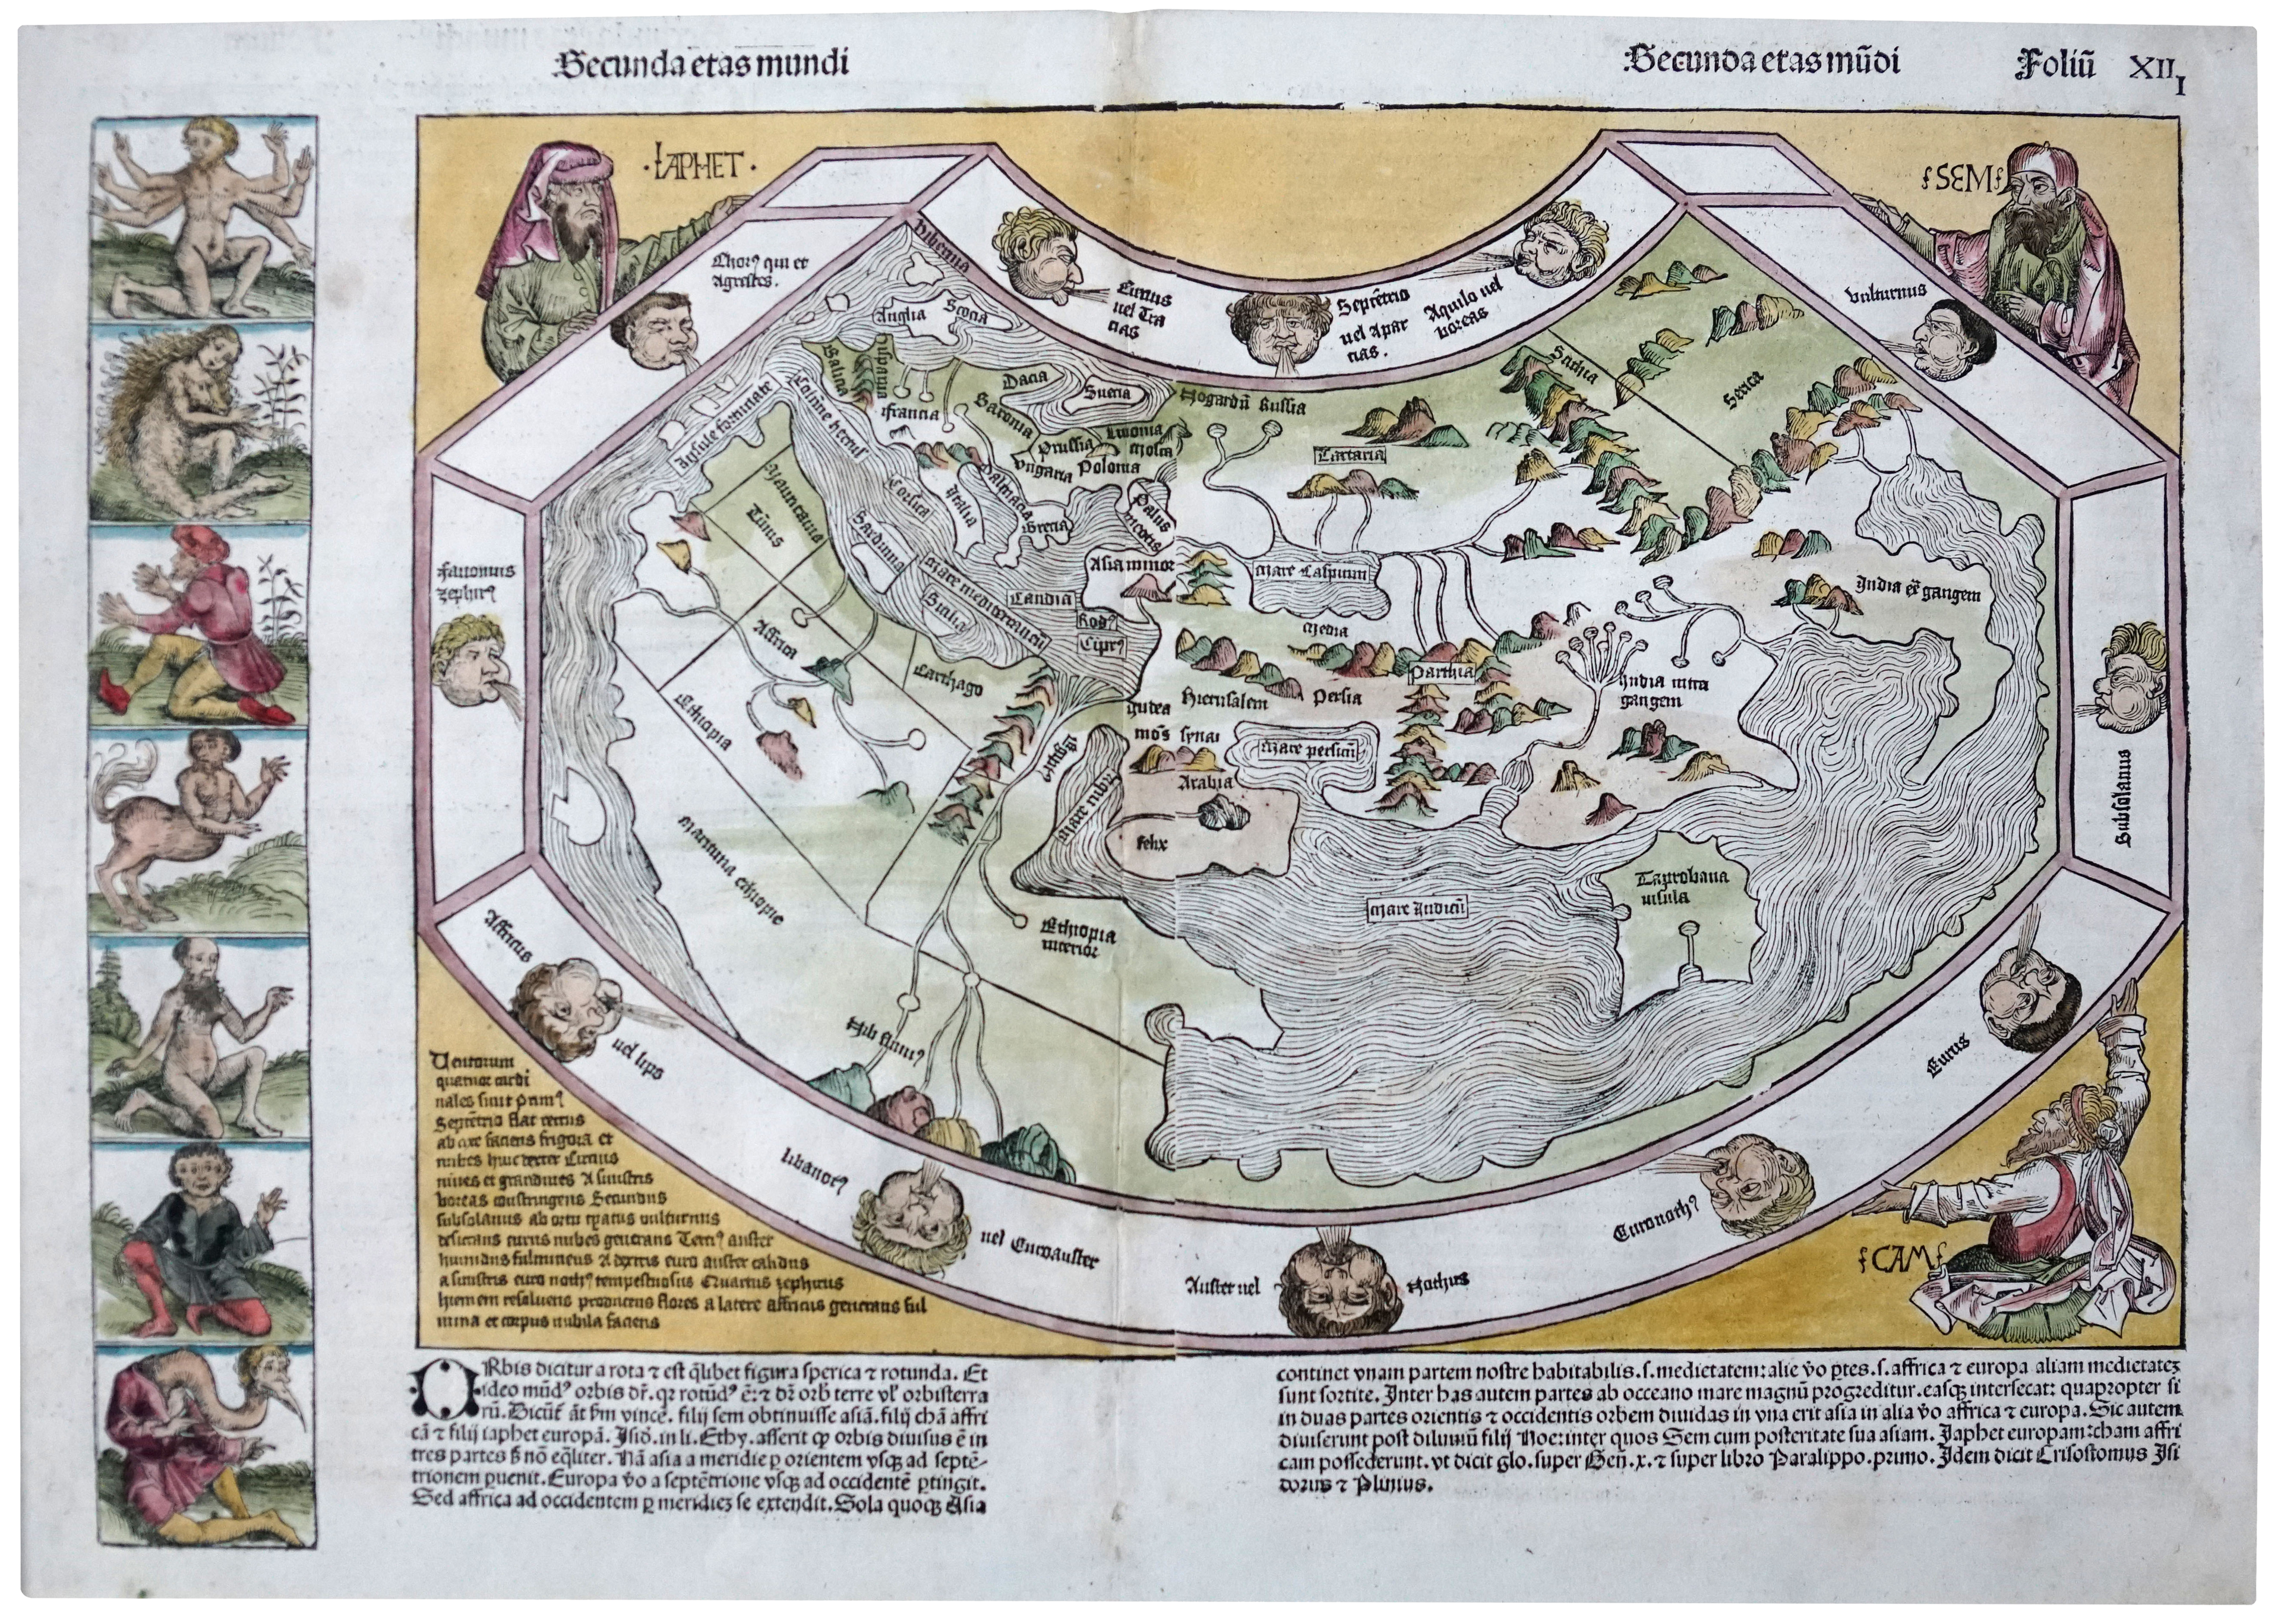 Ptolemaic World by Hartmann Schedel, part of the Nuremberg Chronicle. There are 12 Windheads surrounding the Earth, and the map is supported in three corners by the solemn figures of Ham, Shem and Japhet from the Old Testament.